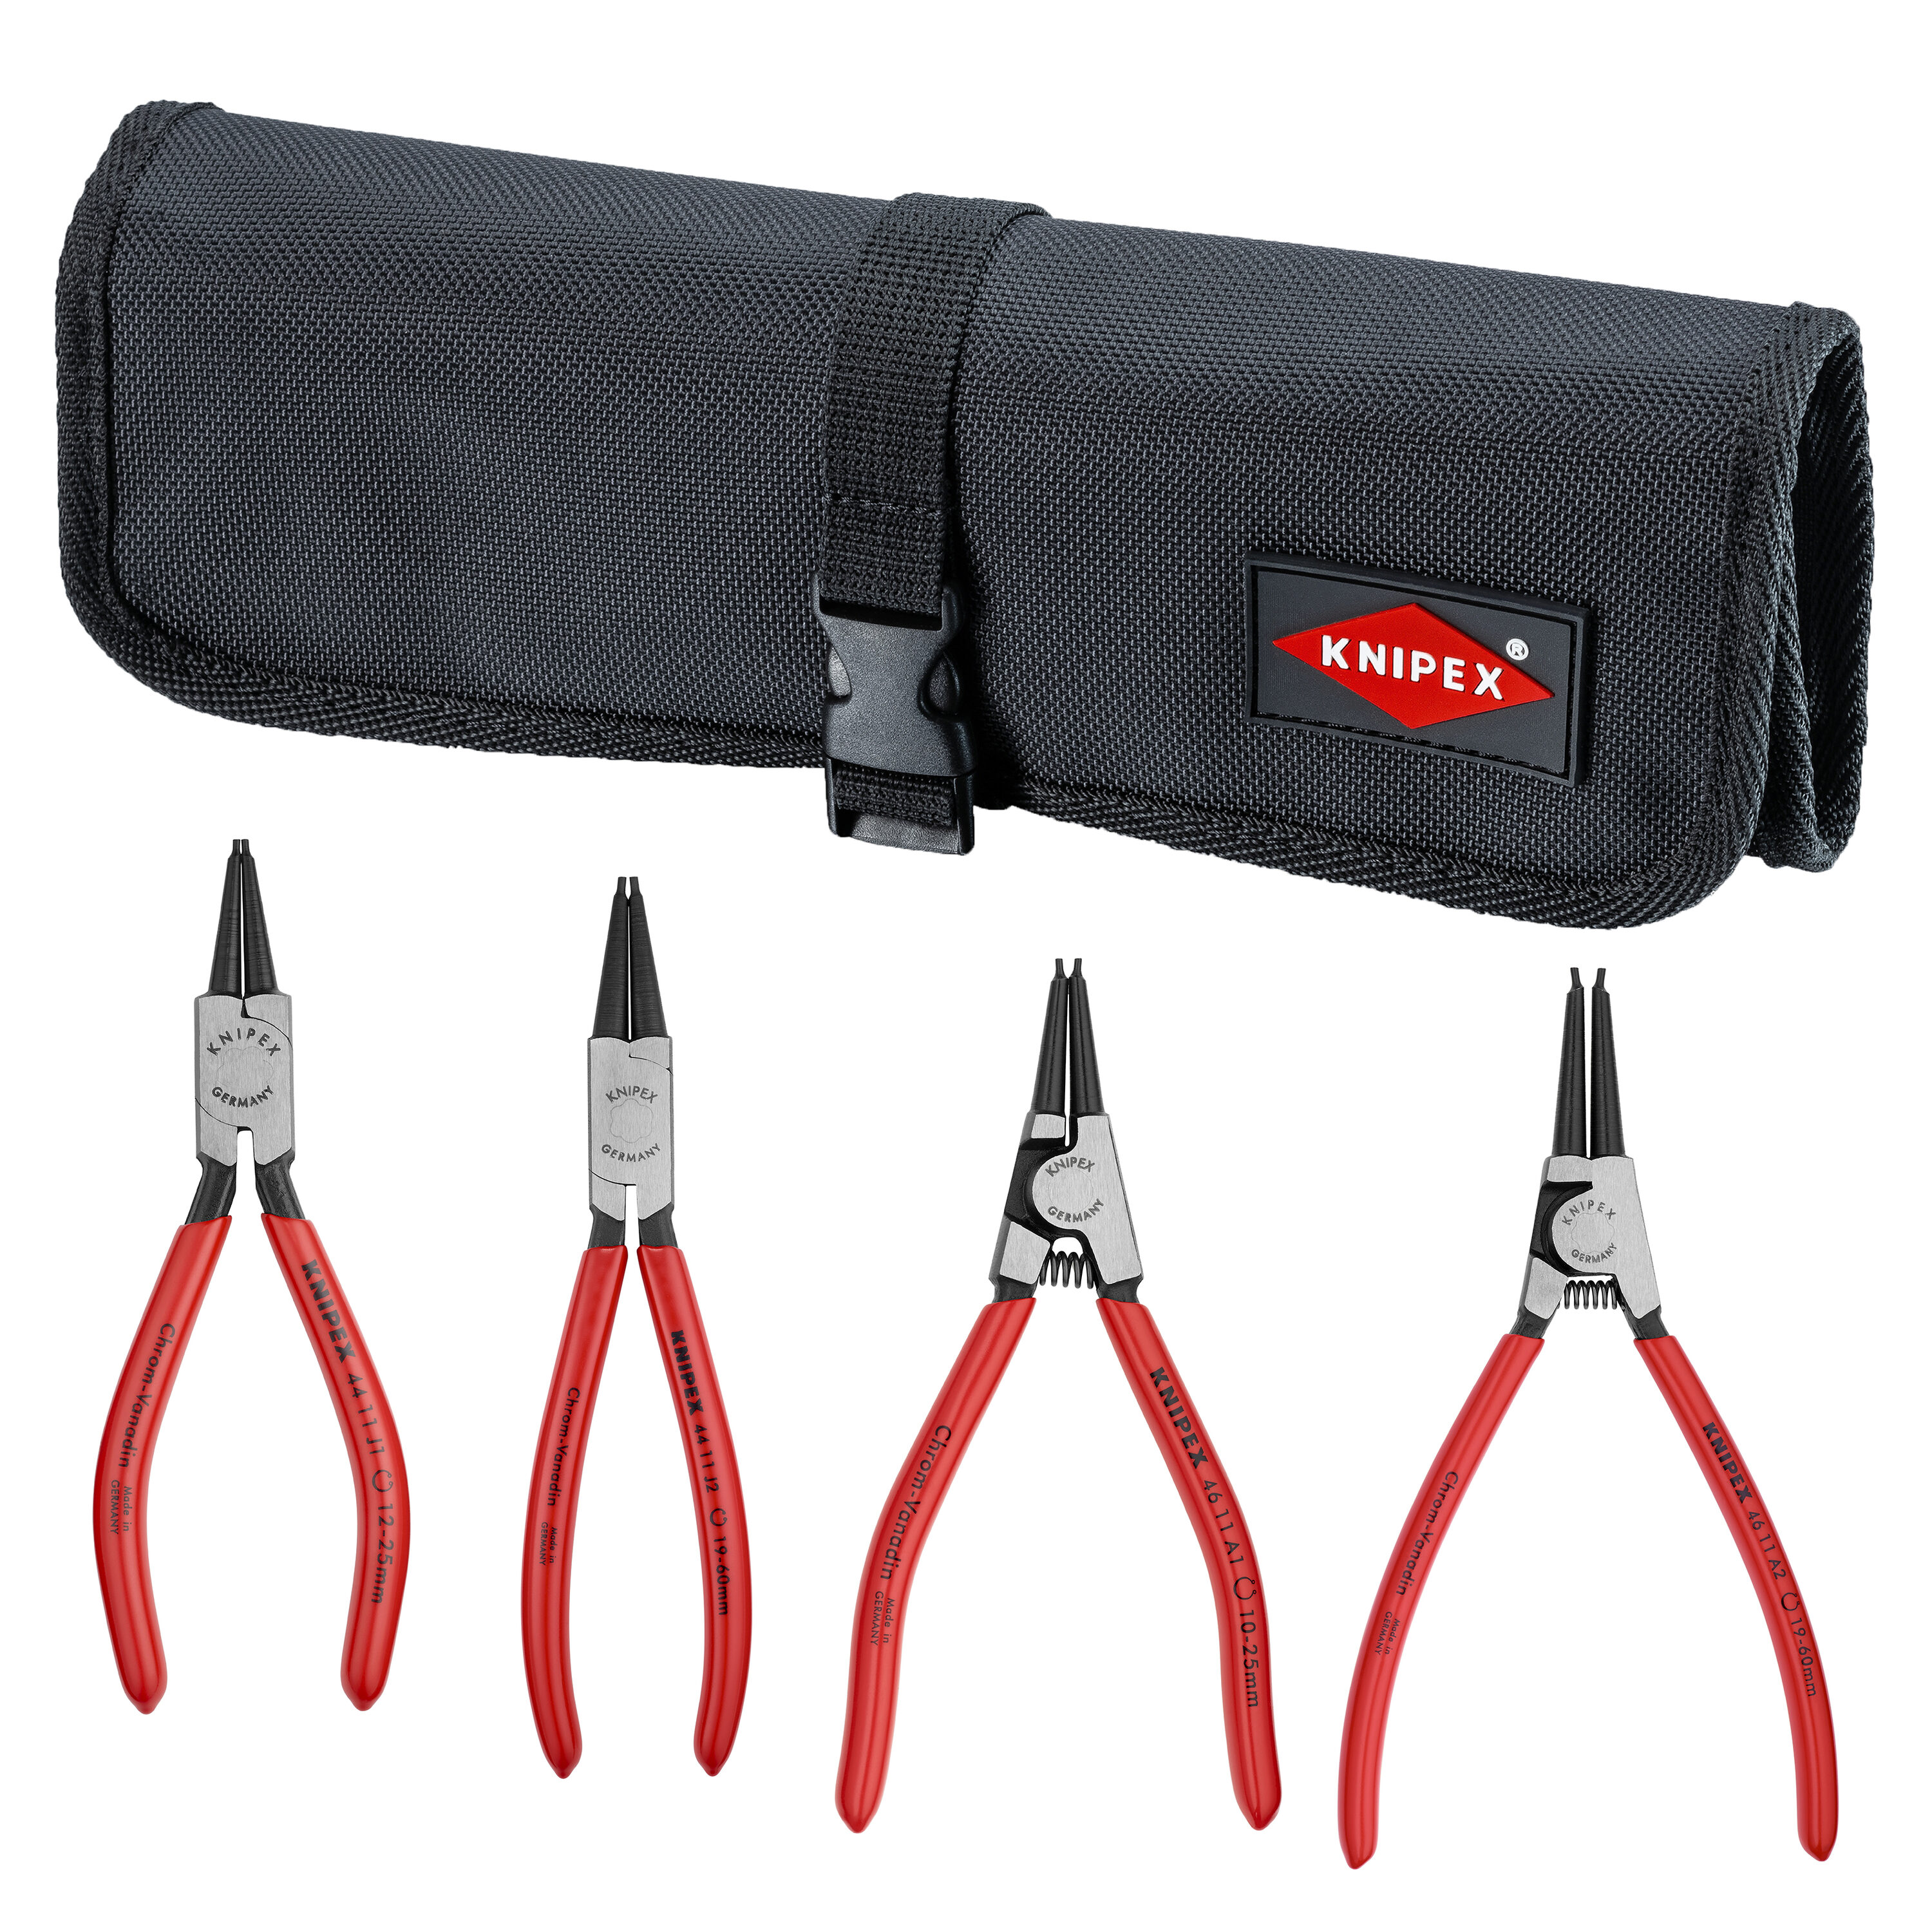 Knipex 8 Piece Precision Circlip Pliers Set with Case